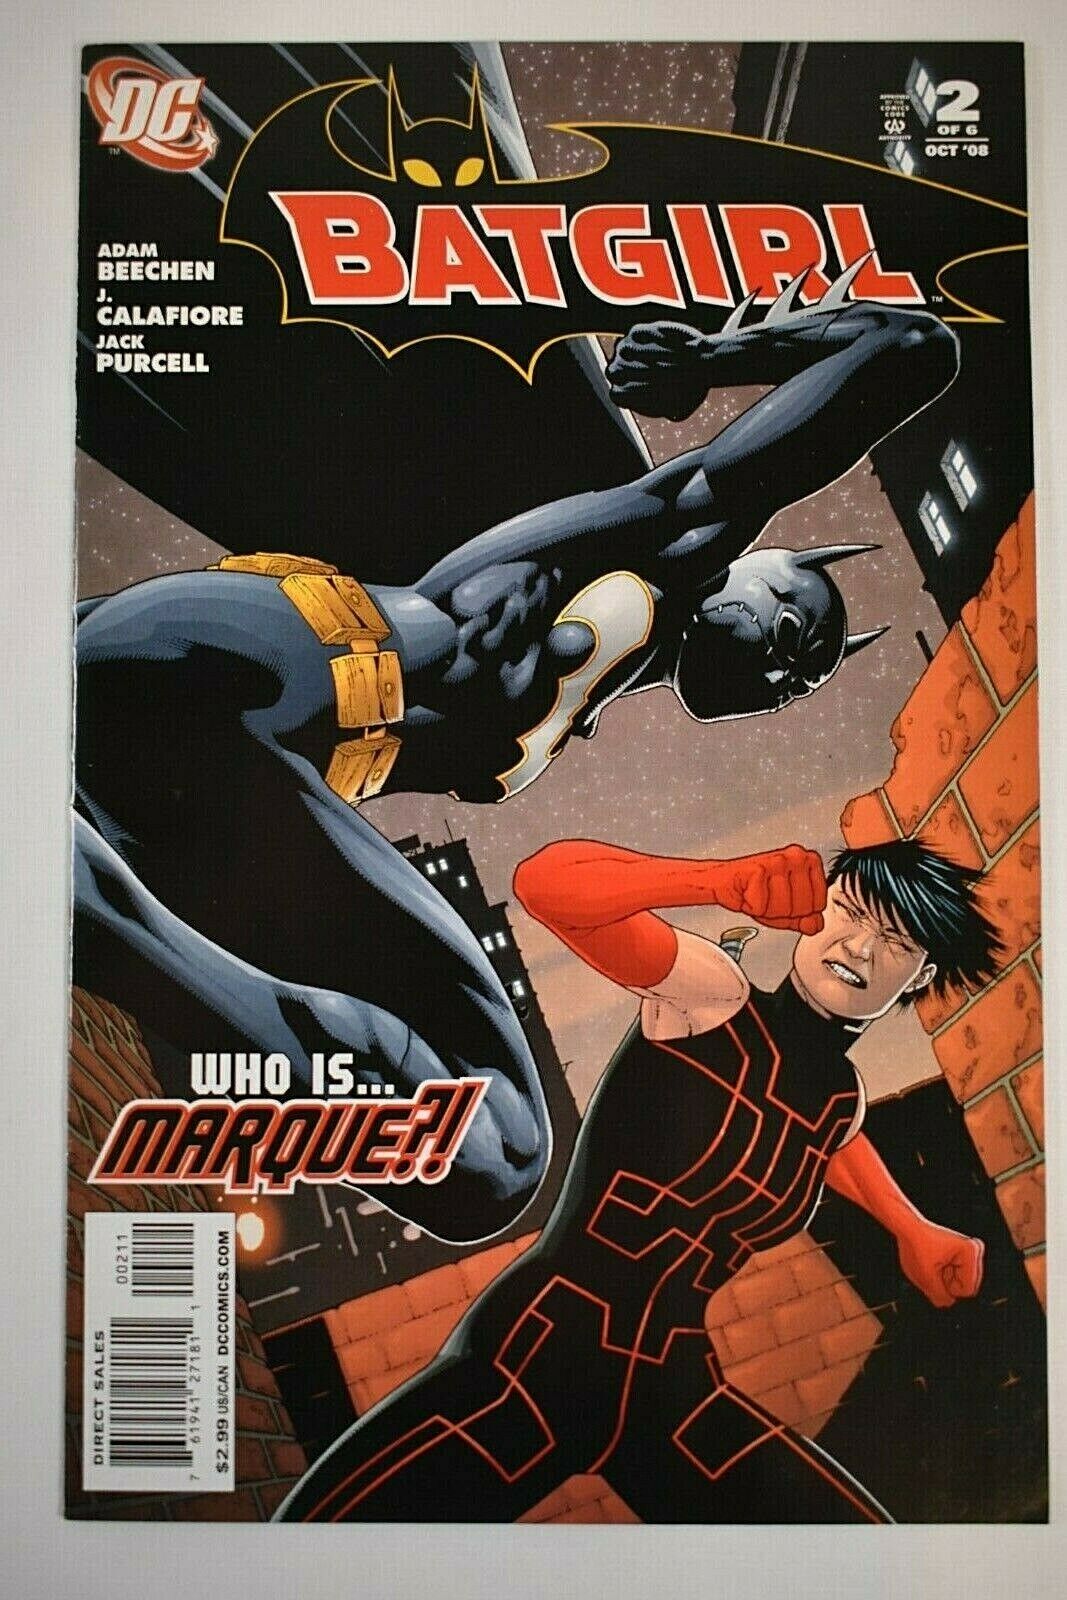 DC Batgirl #2  Vol 2 2008  - 1st App Marque, Andy Clarke Cover, Deathstroke